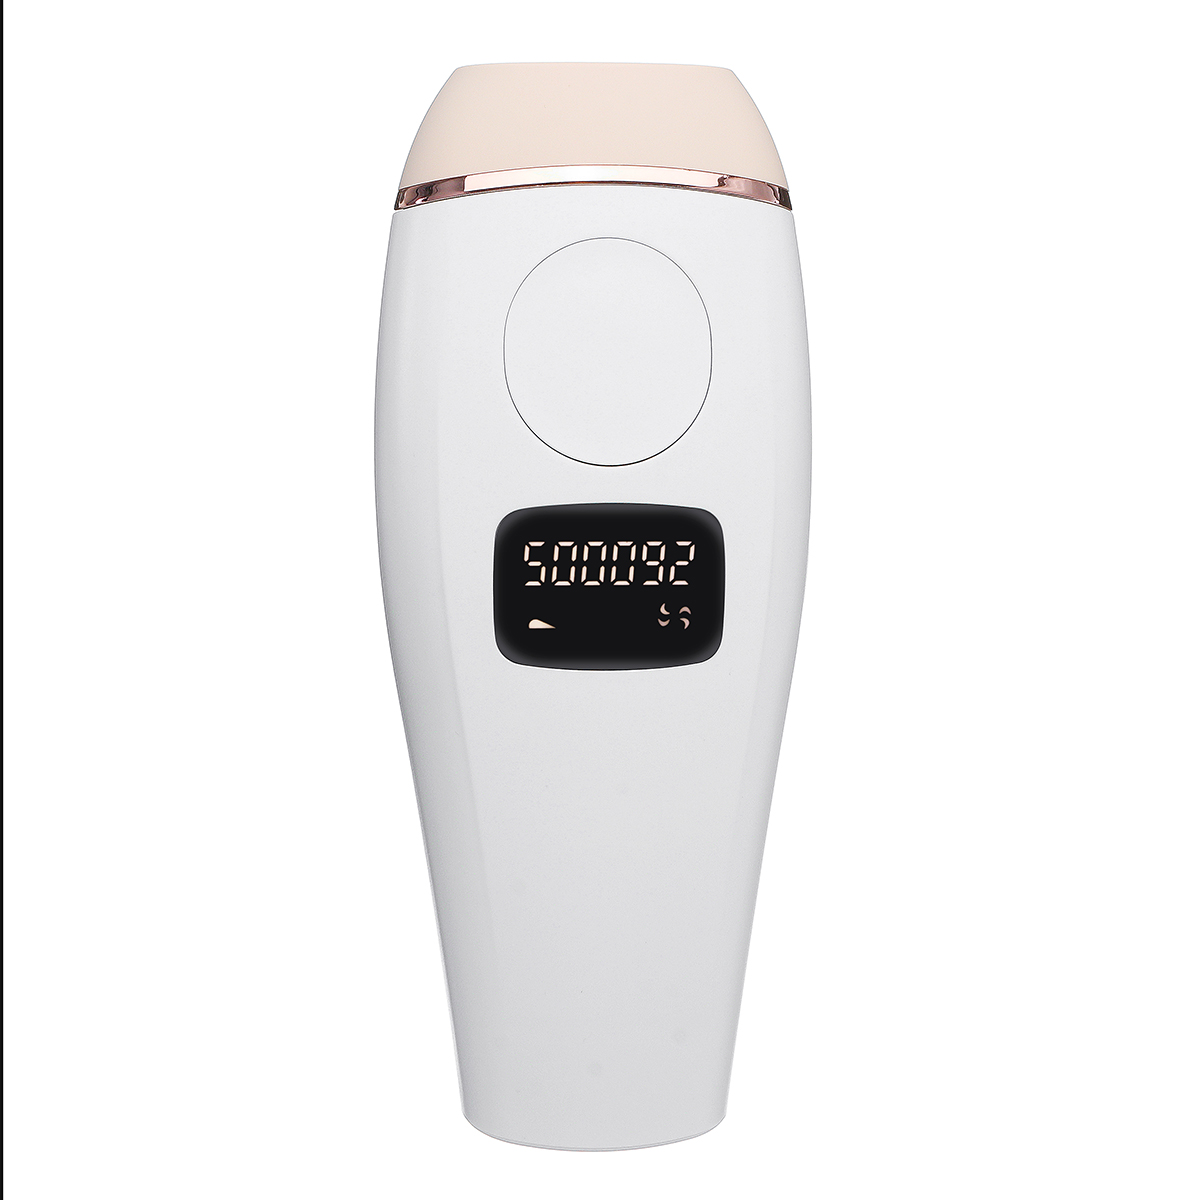 

500,000 Flashes IPL Hair Removal Device Body Hair Removal Permanent Hair Removal IPL Epilator System